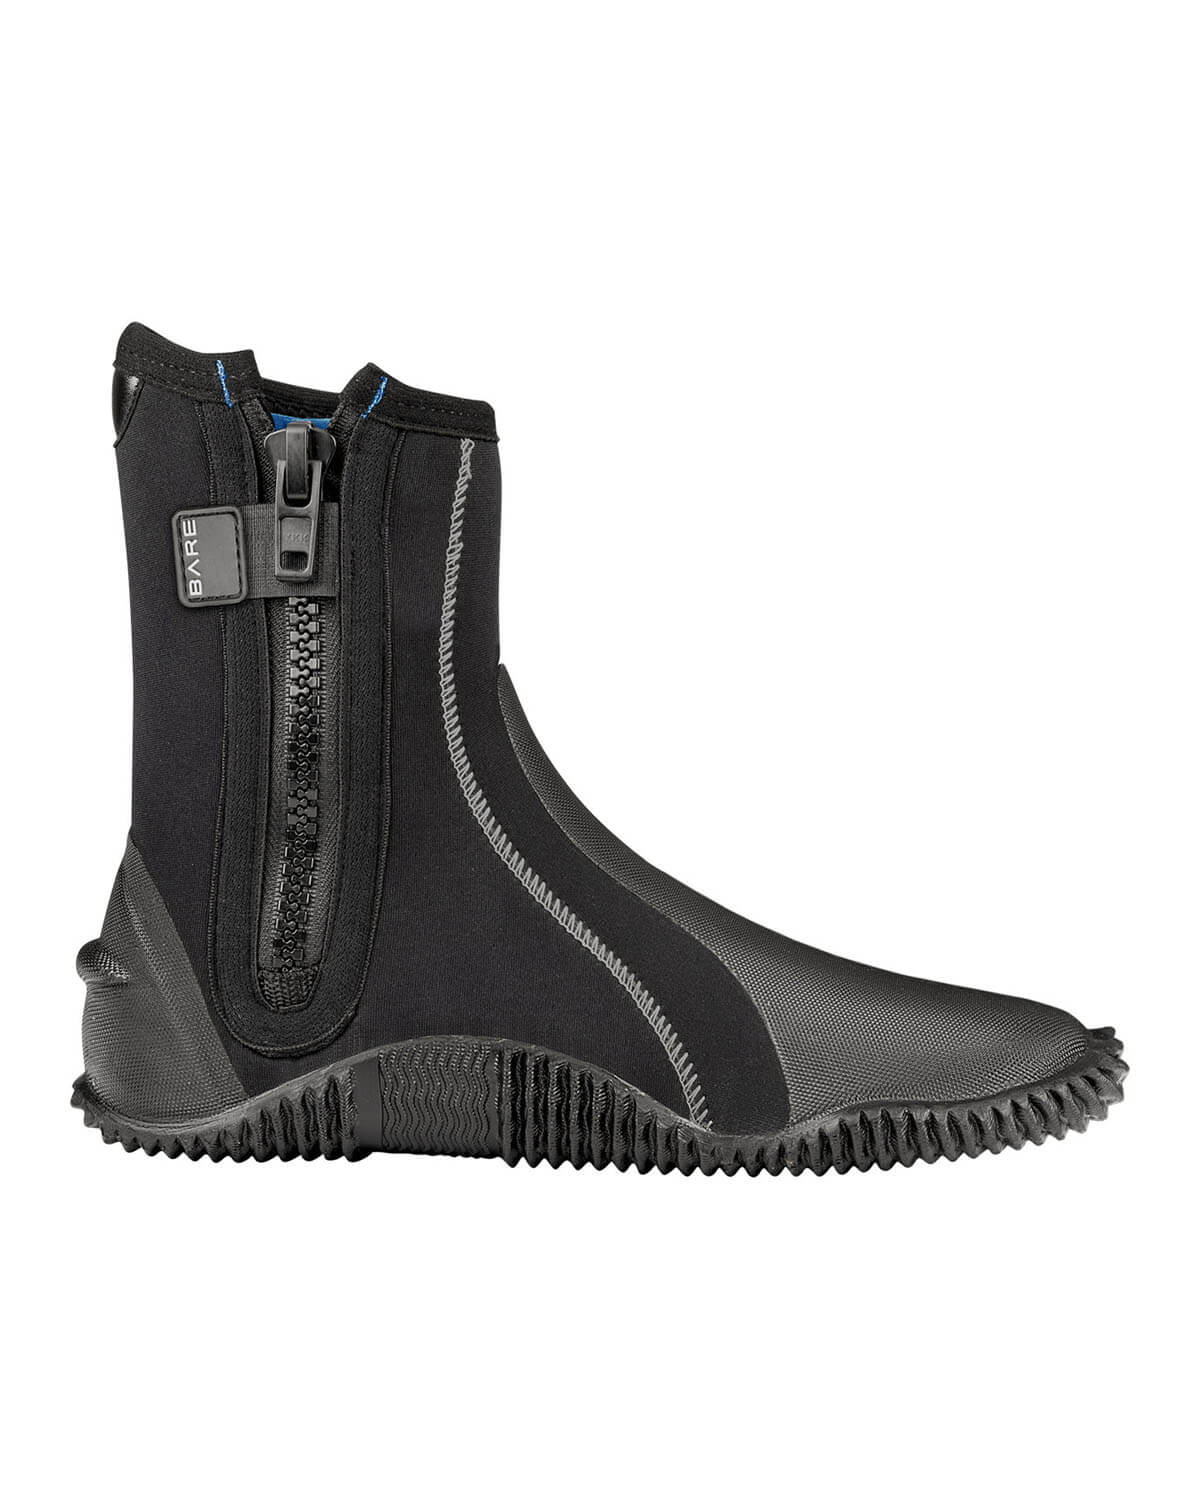 5mm BARE Round Toe Wetsuit Boots